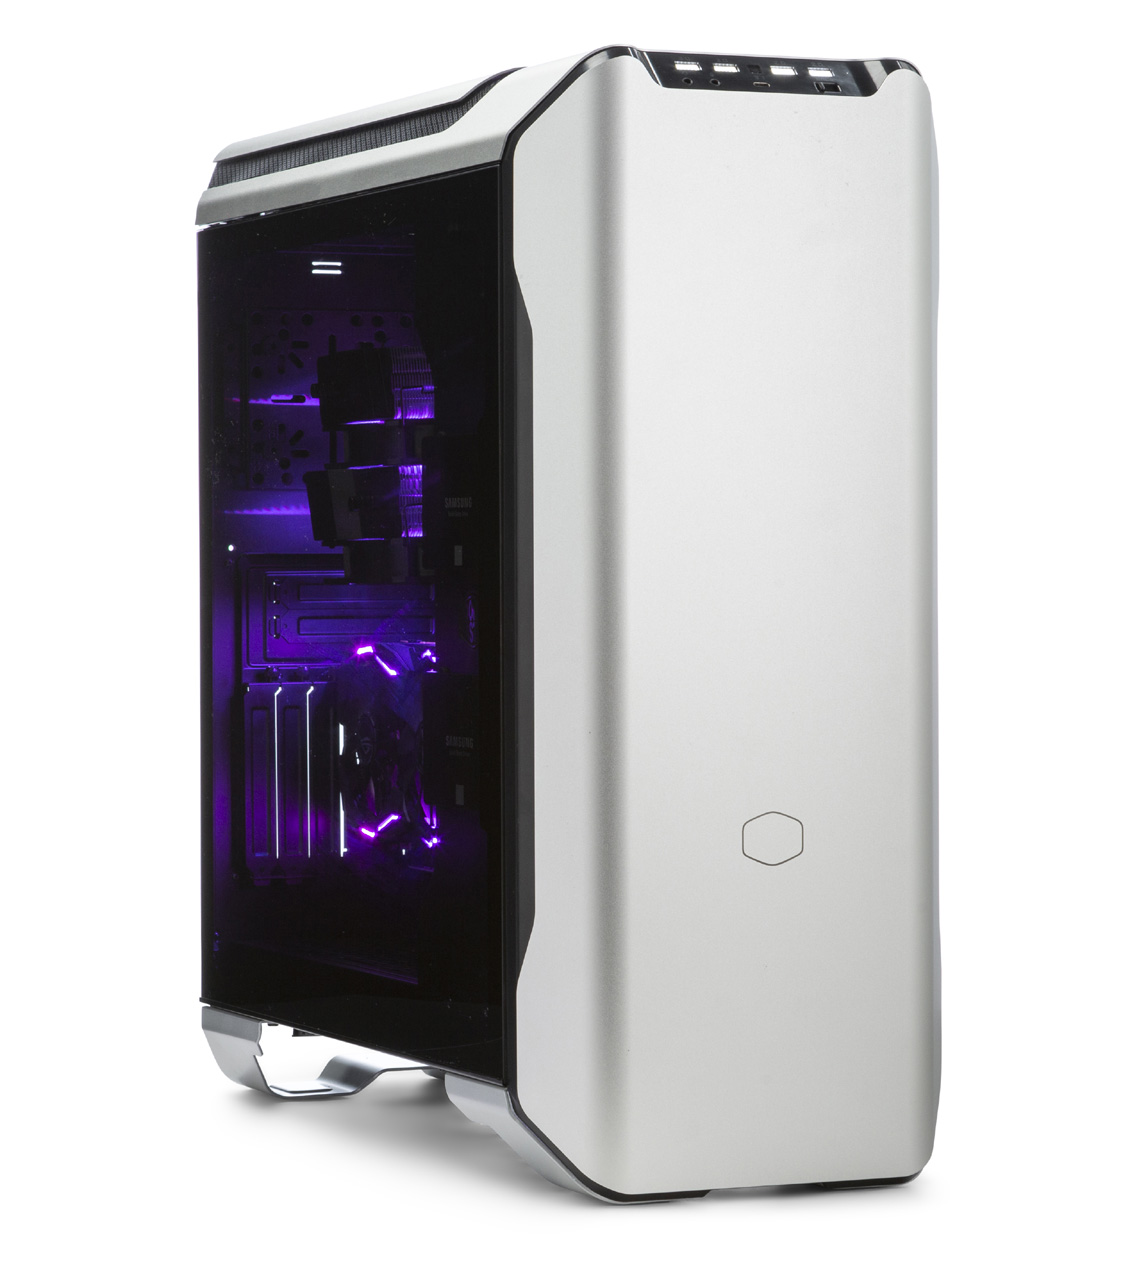 Cooler Master Mastercase Sl600m Review Subtle Style Great